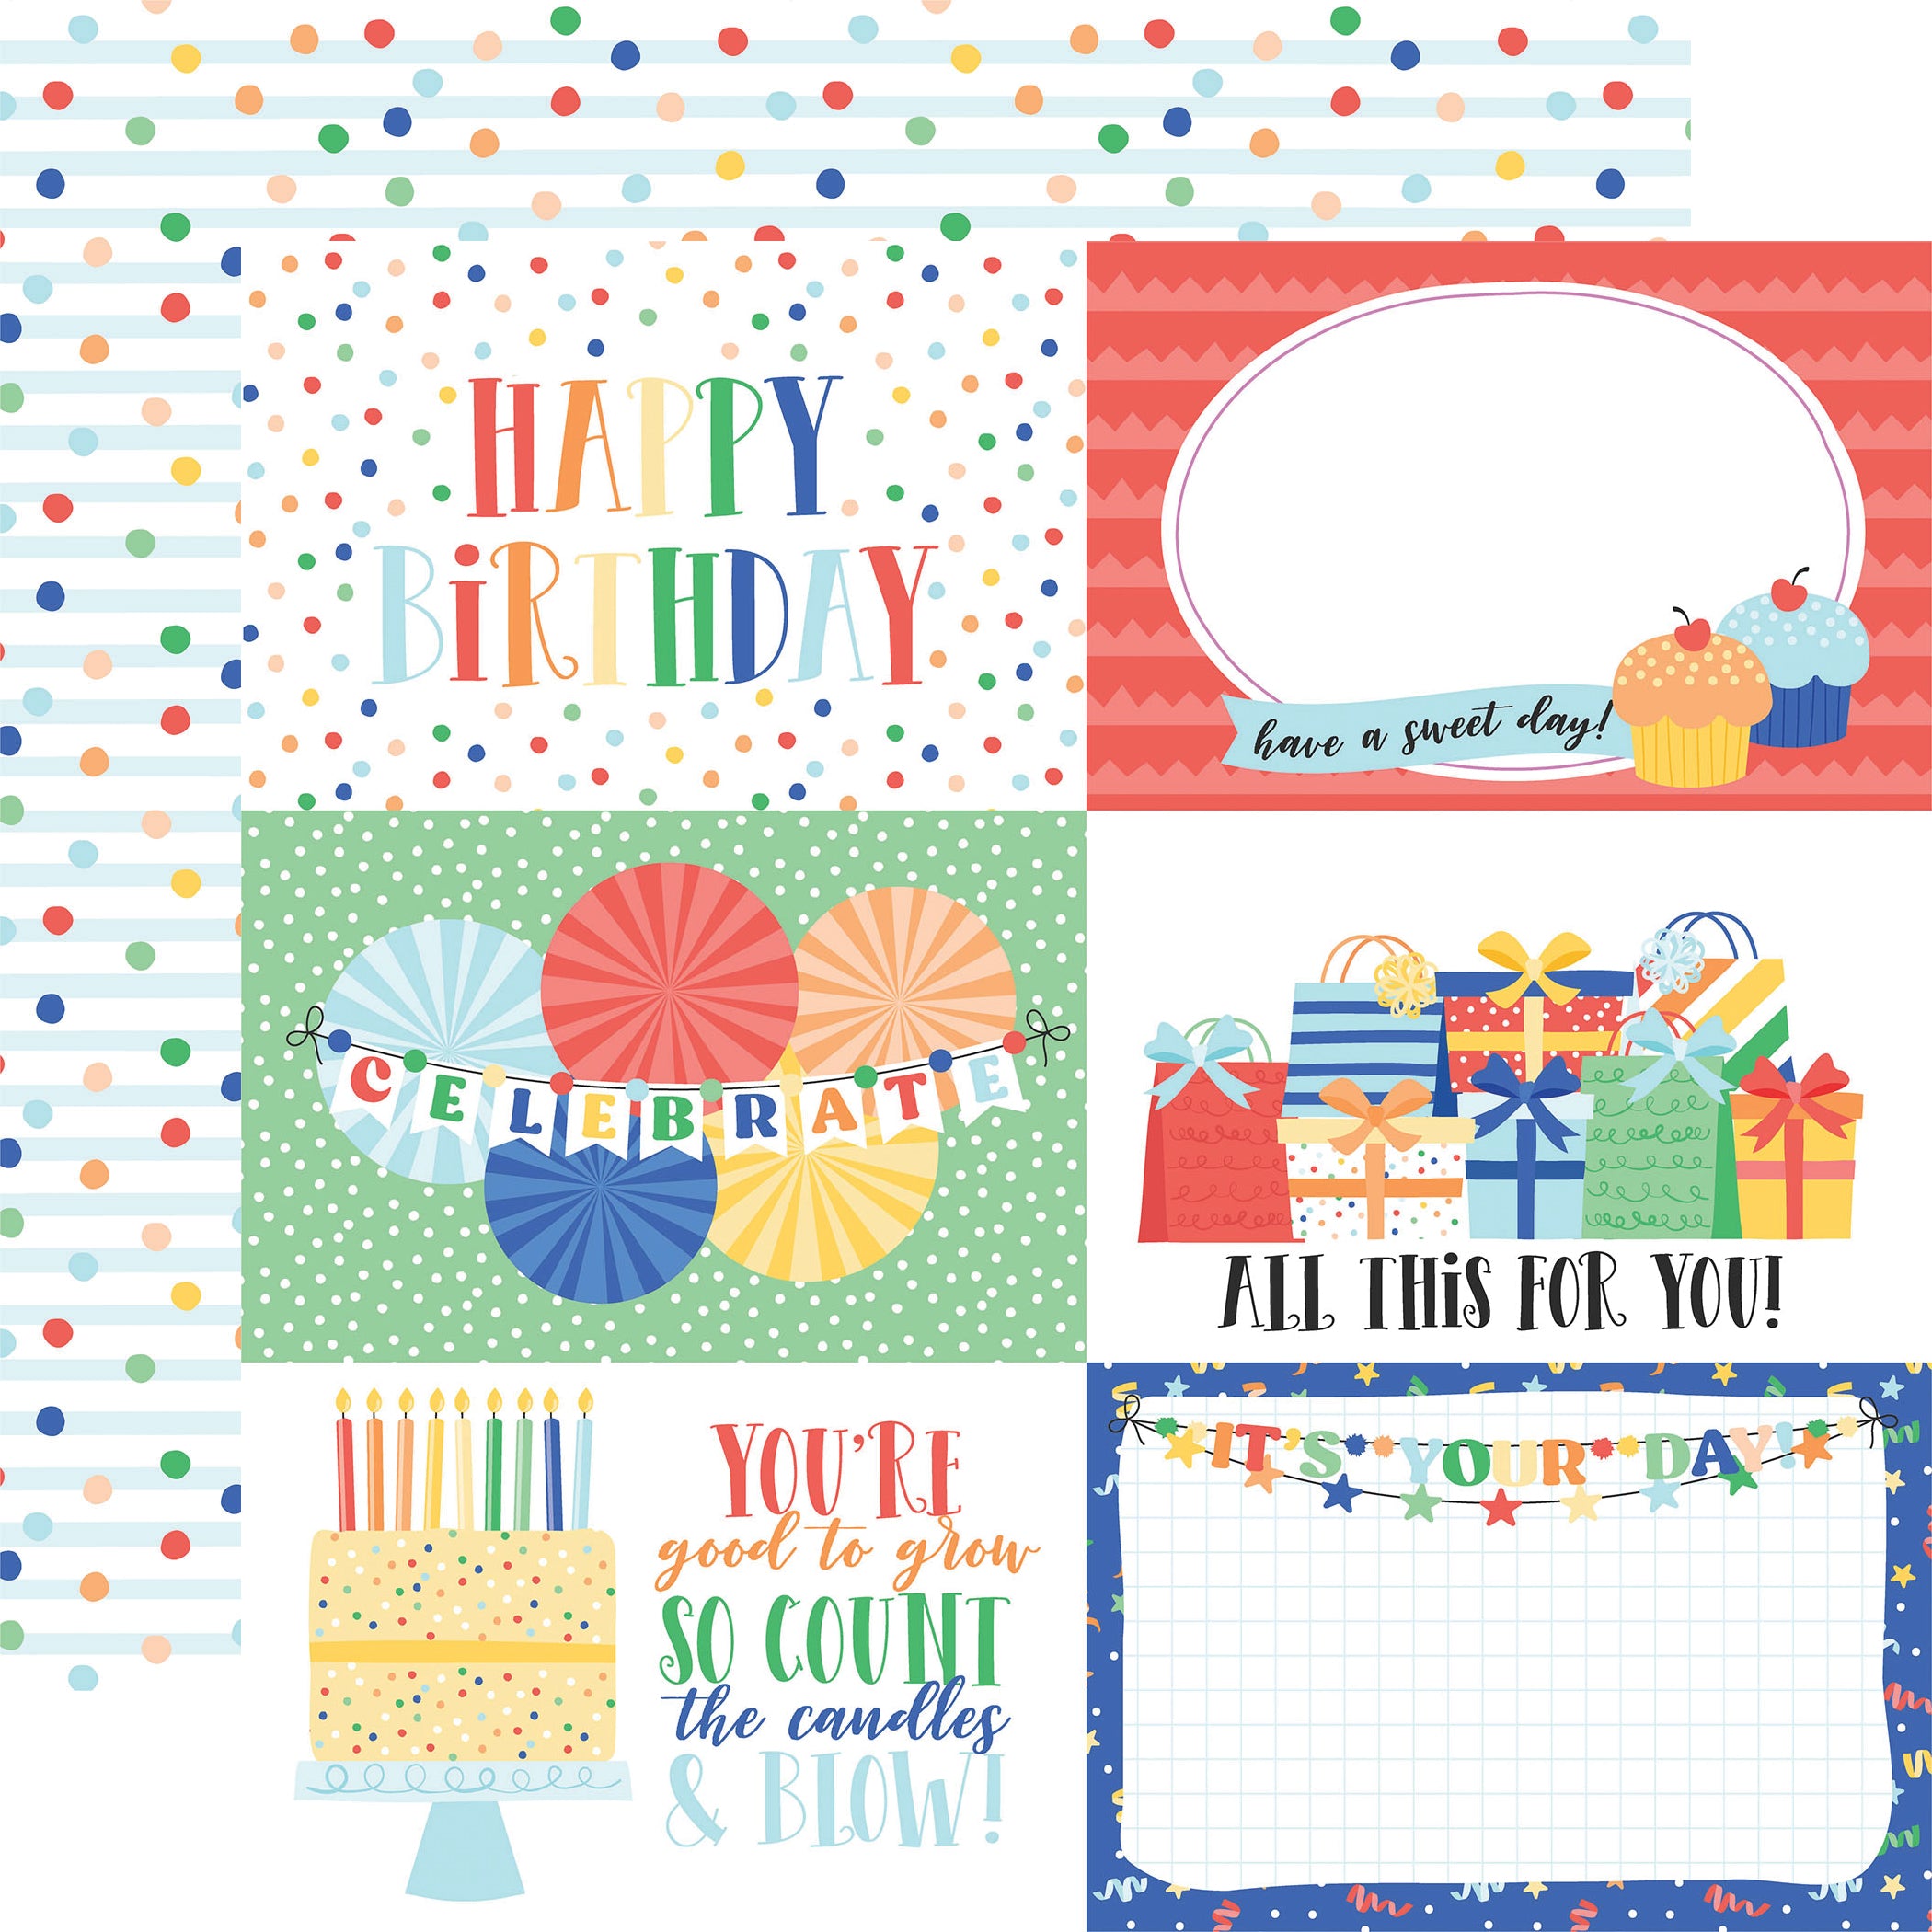 Make a Wish Birthday Boy Collection 12 x 12 Scrapbook Collection Kit by Echo Park Paper